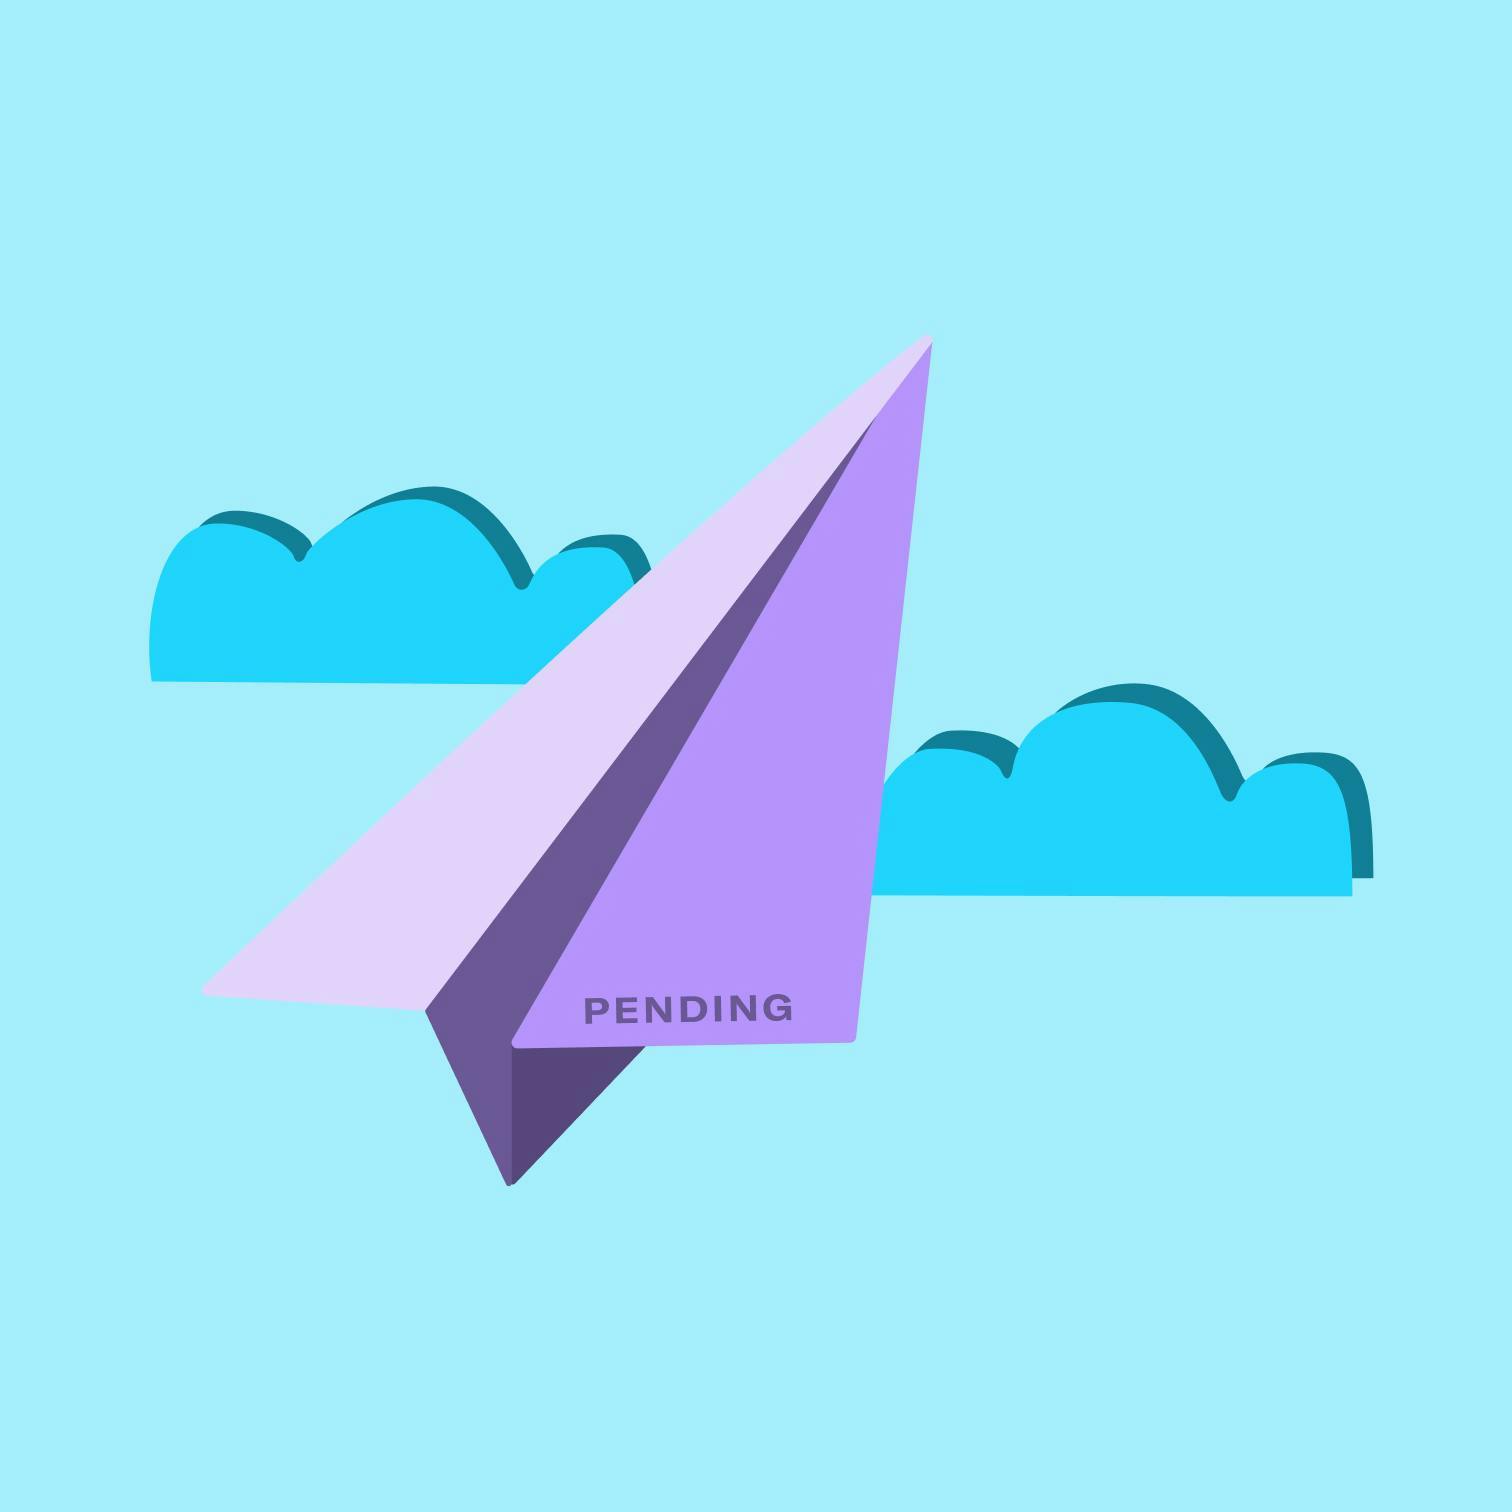 Paper plane flying through clouds 